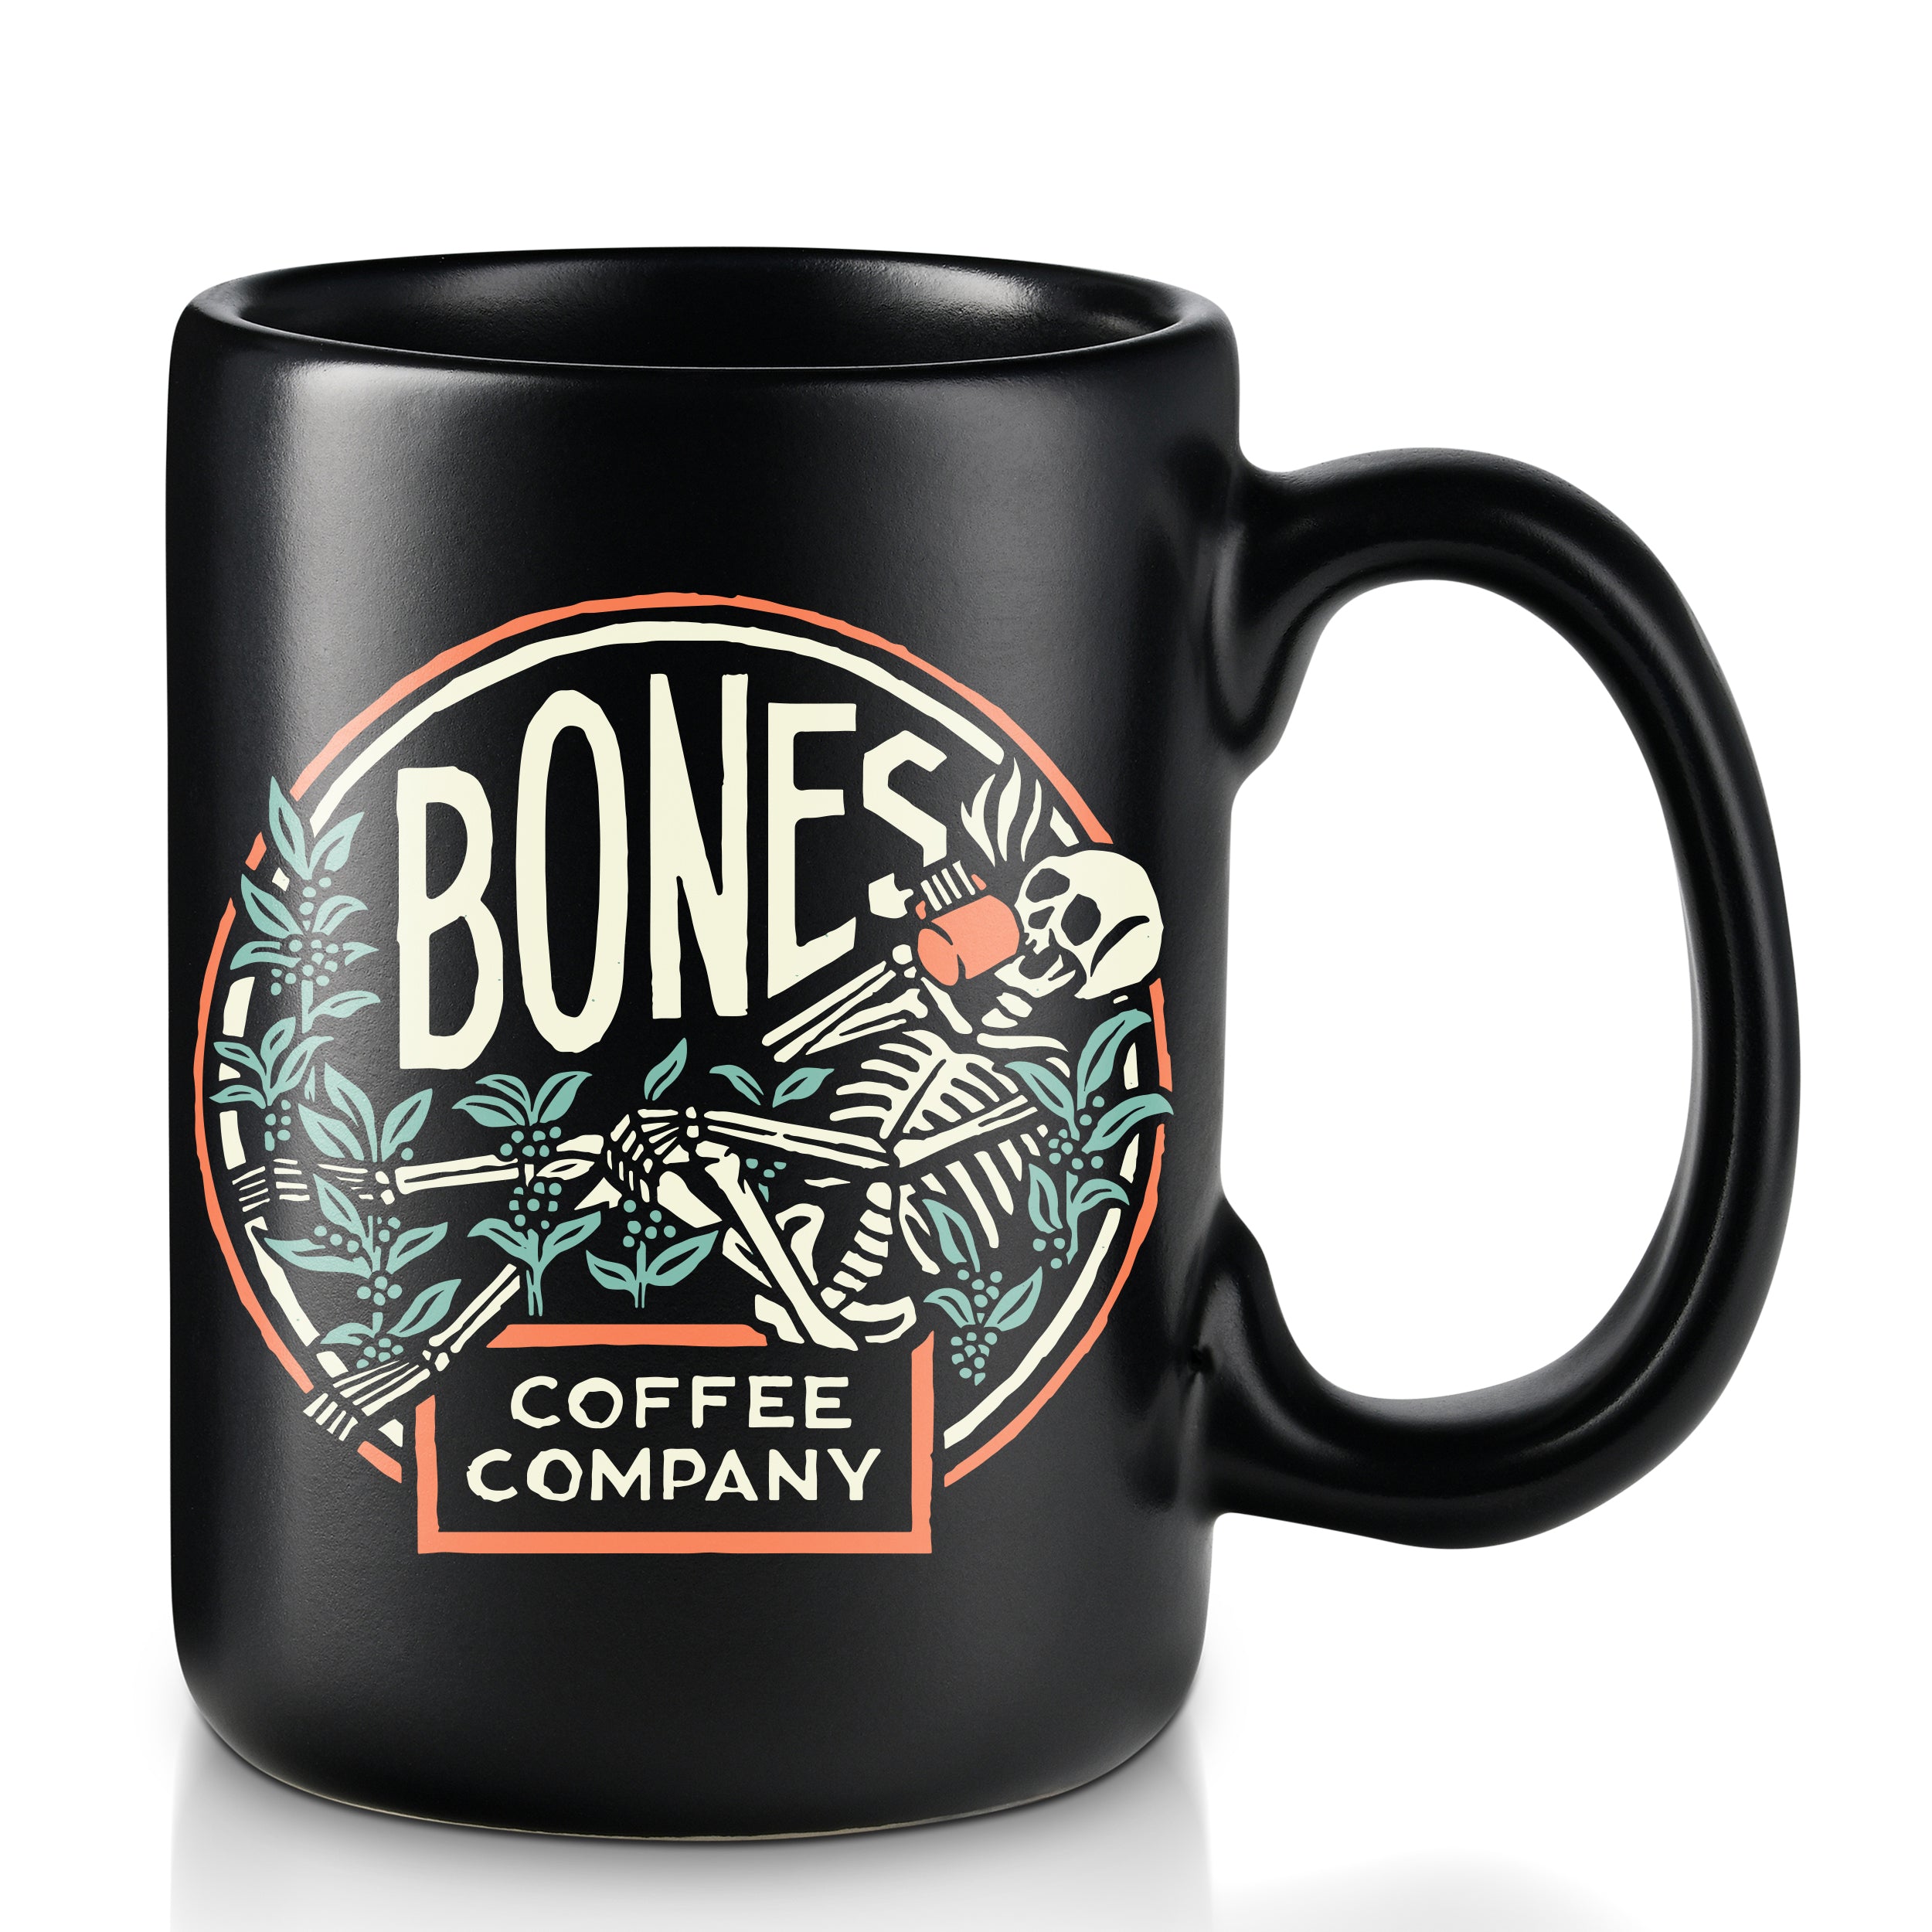 A black colored mug that has the Bones Coffee Company's classic logo on it. The logo has a skeleton resting on greenery sipping on coffee.